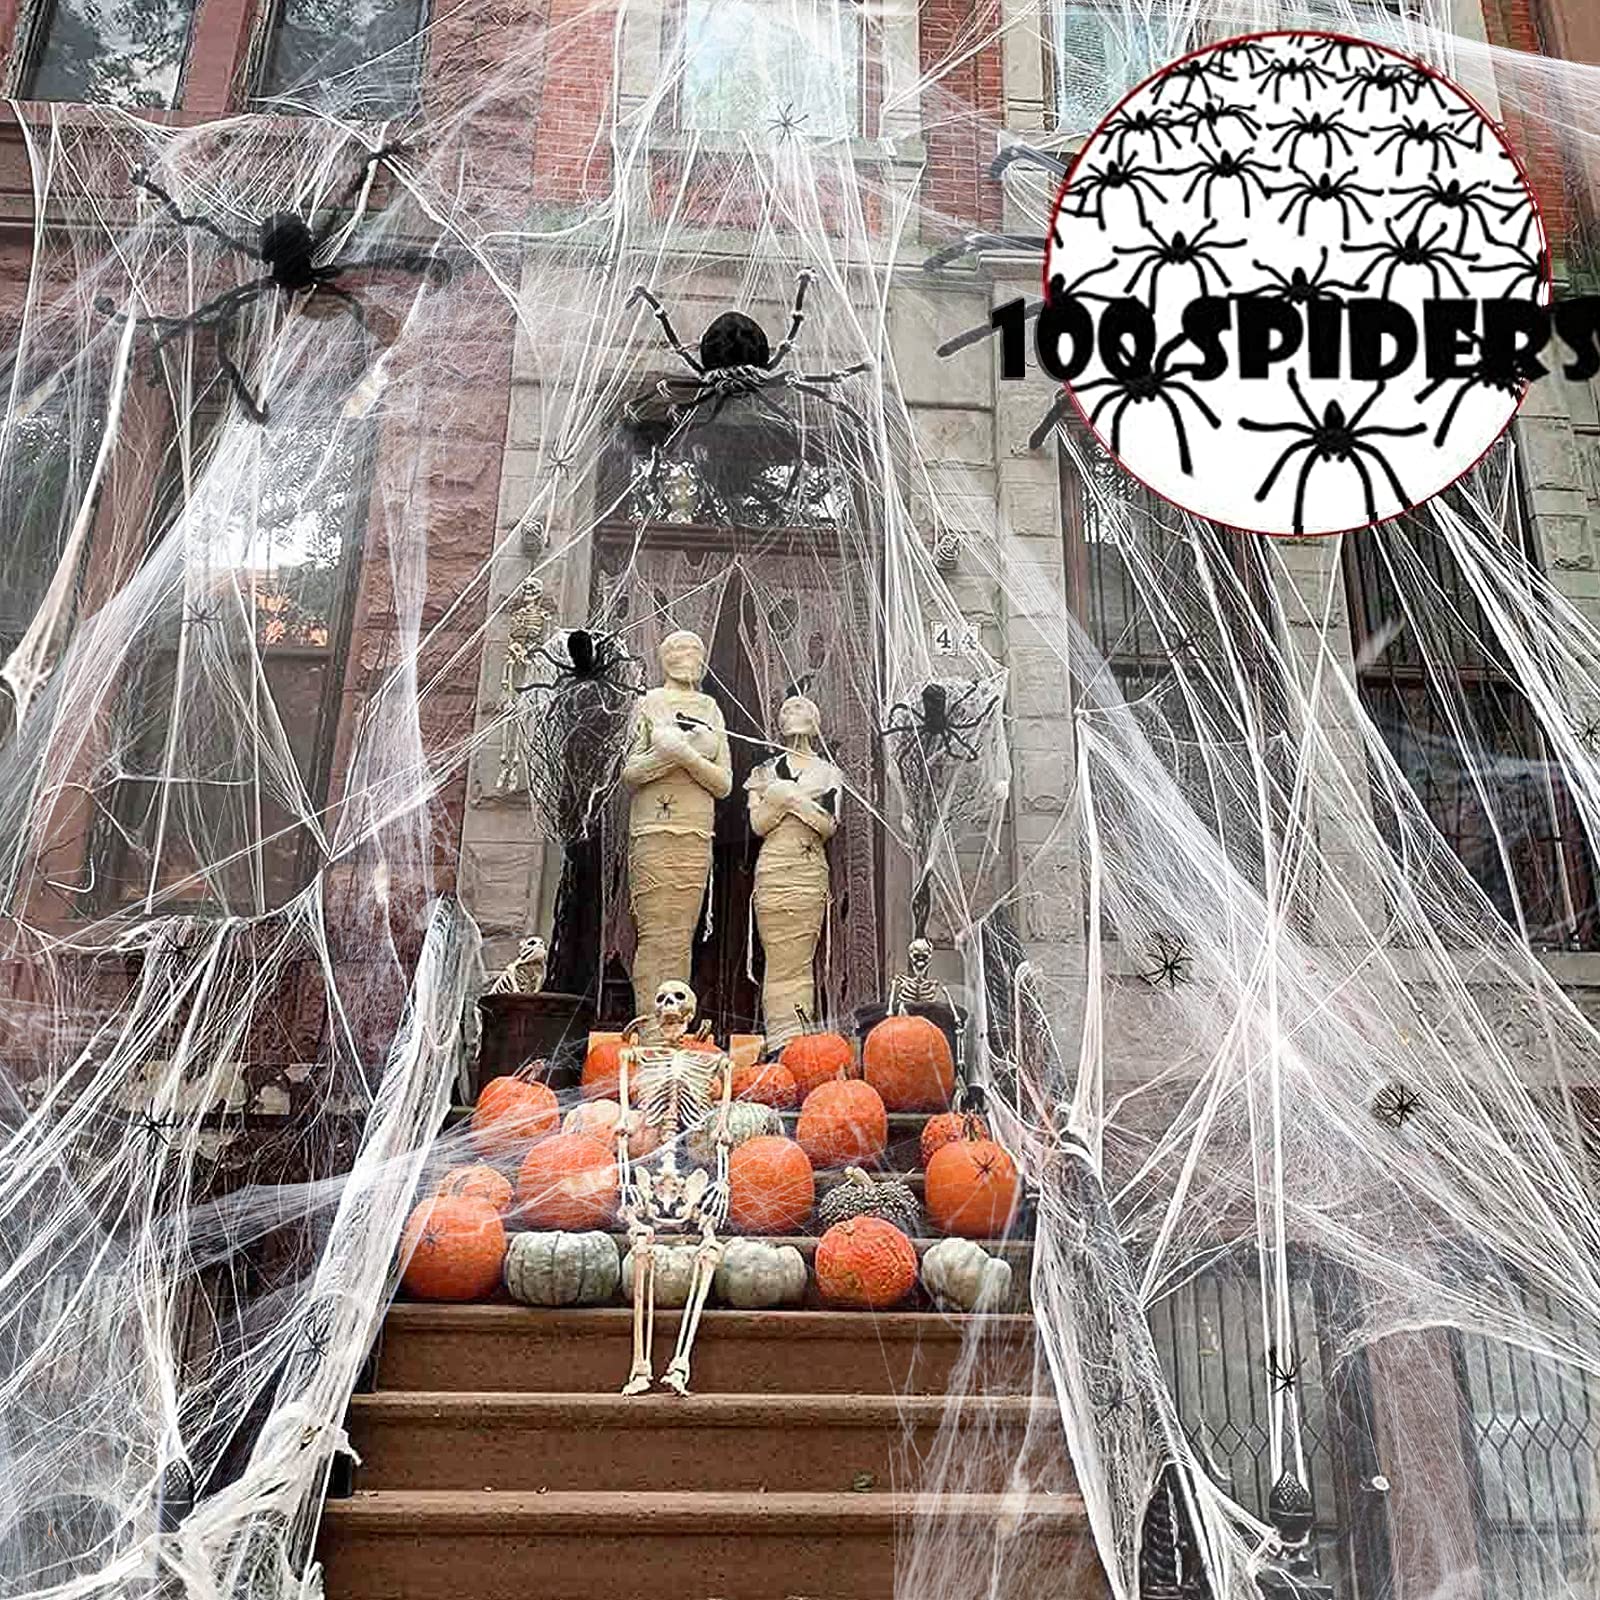 1200 sqft Spider Webs Halloween Decorations, Super Stretch Spider Web Cobwebs with 100 Plastic Fake Spiders Haunted House Yard Creepy Scene Props Indoor Outdoor Decor and Halloween Party Supplies (300g/10.58 oz)